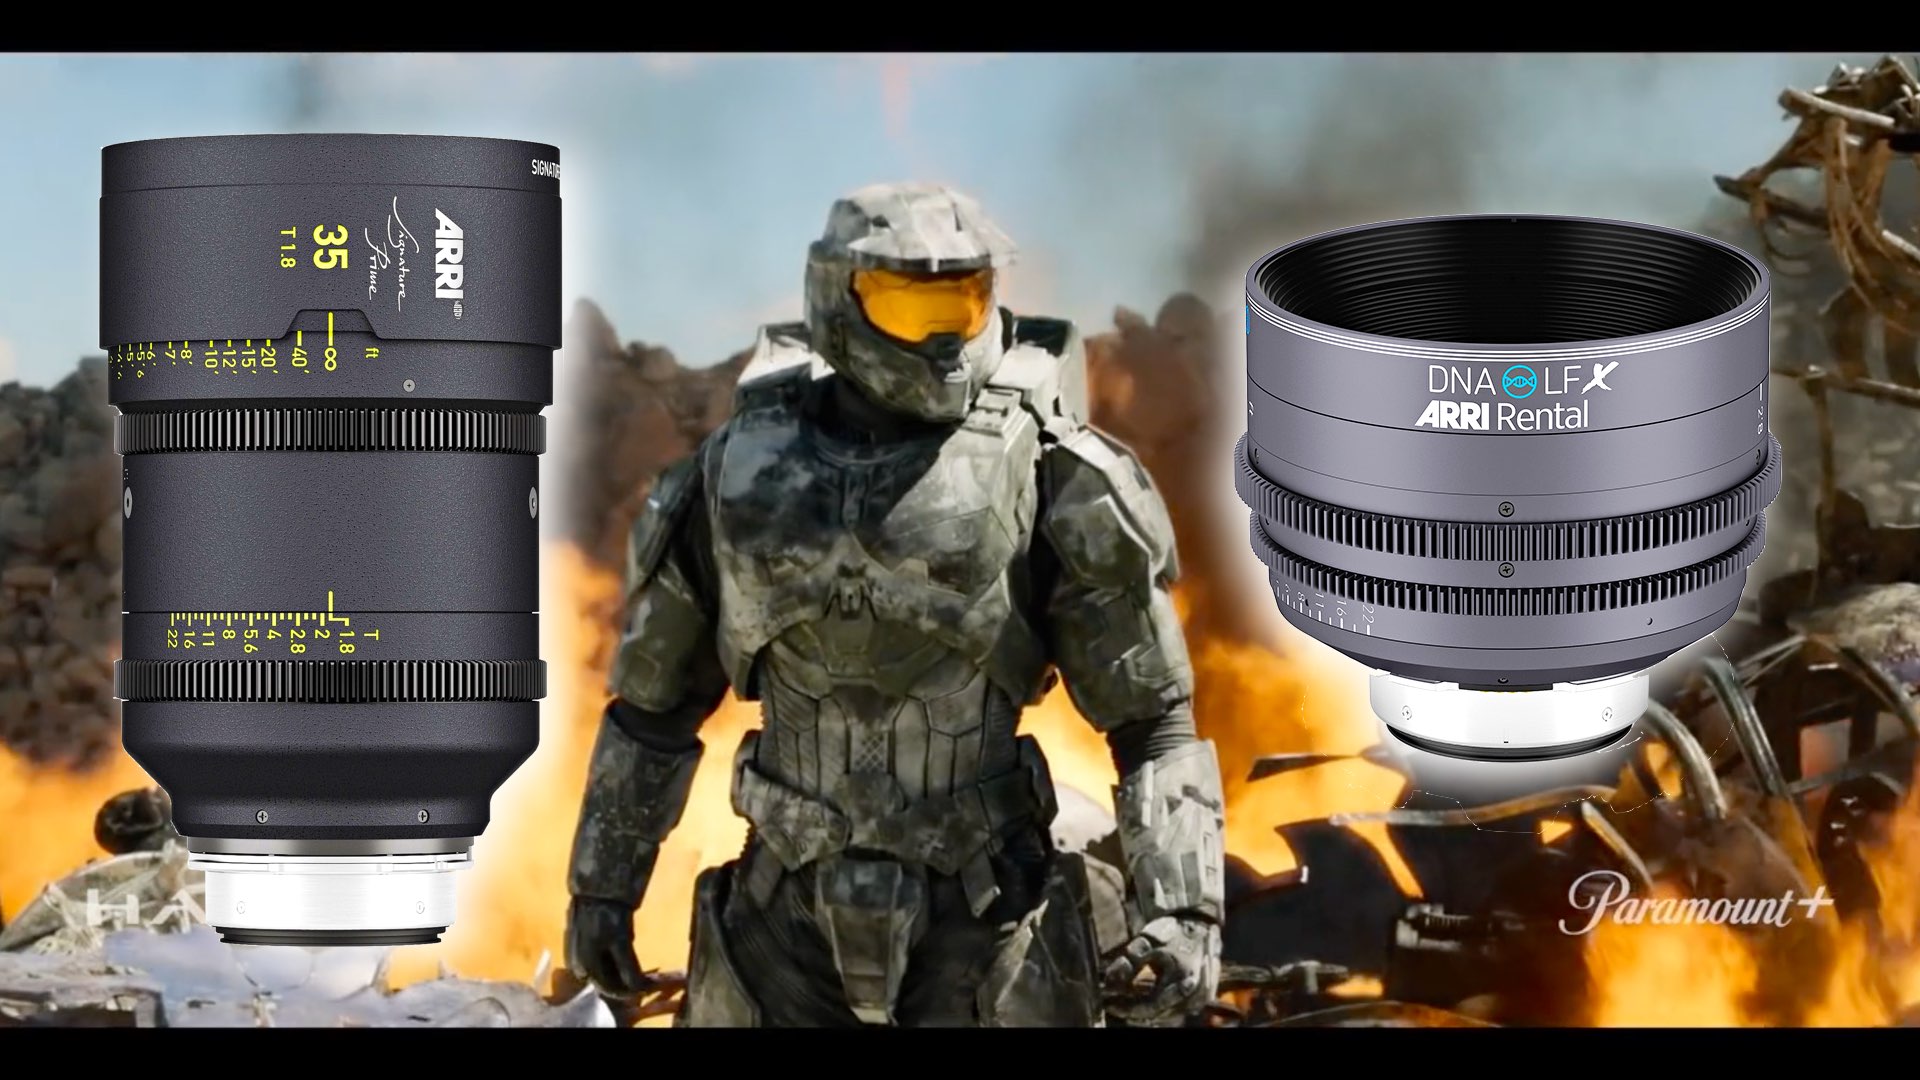 Halo Cinematography: Switching Between ARRI Signature to DNA Primes